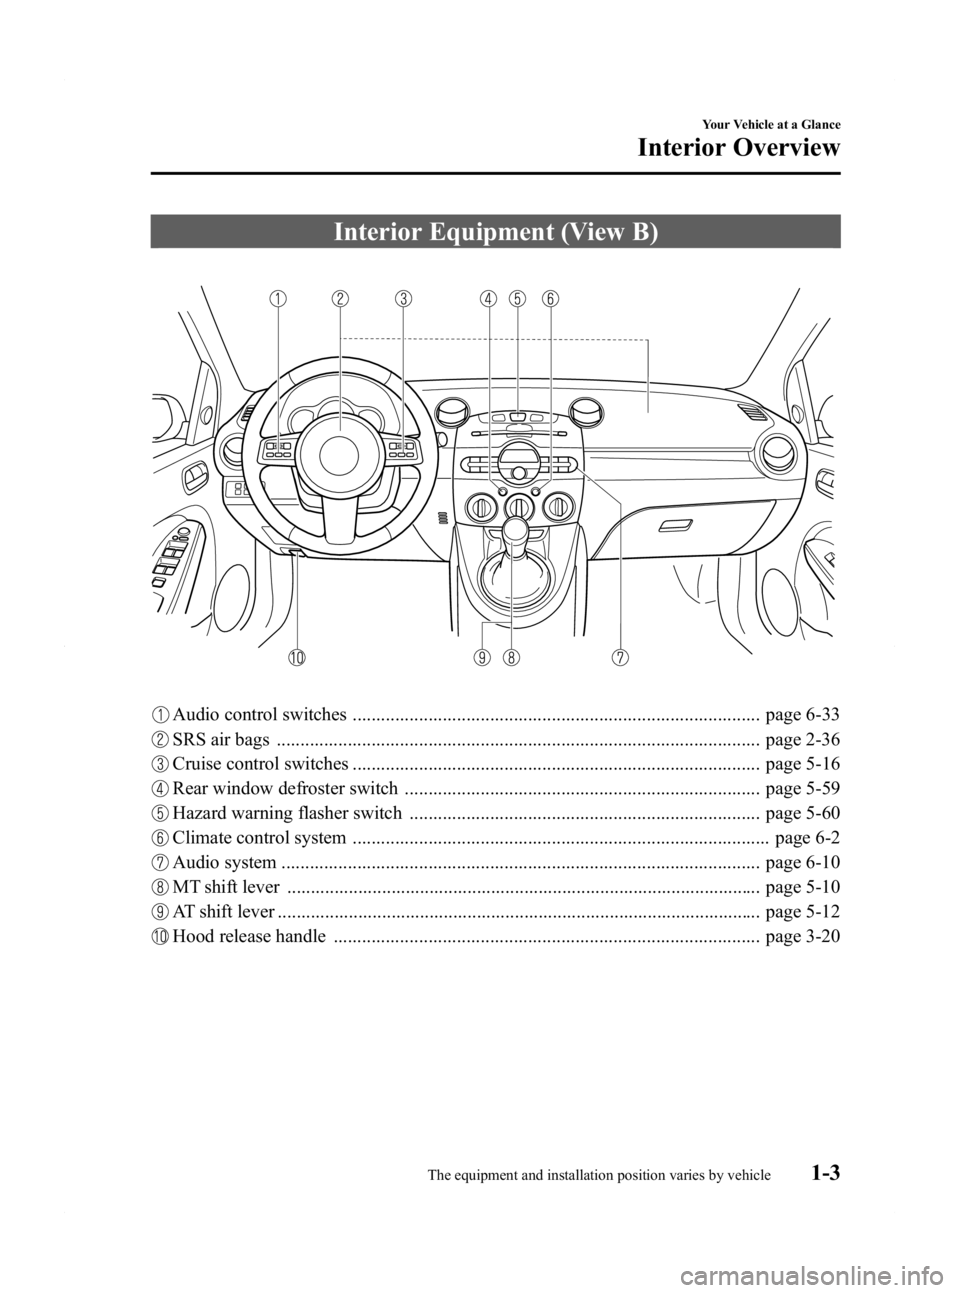 MAZDA MODEL 2 2011  Owners Manual Black plate (9,1)
Interior Equipment (View B)
Audio control switches ...................................................................................... page 6-33
SRS air bags .....................